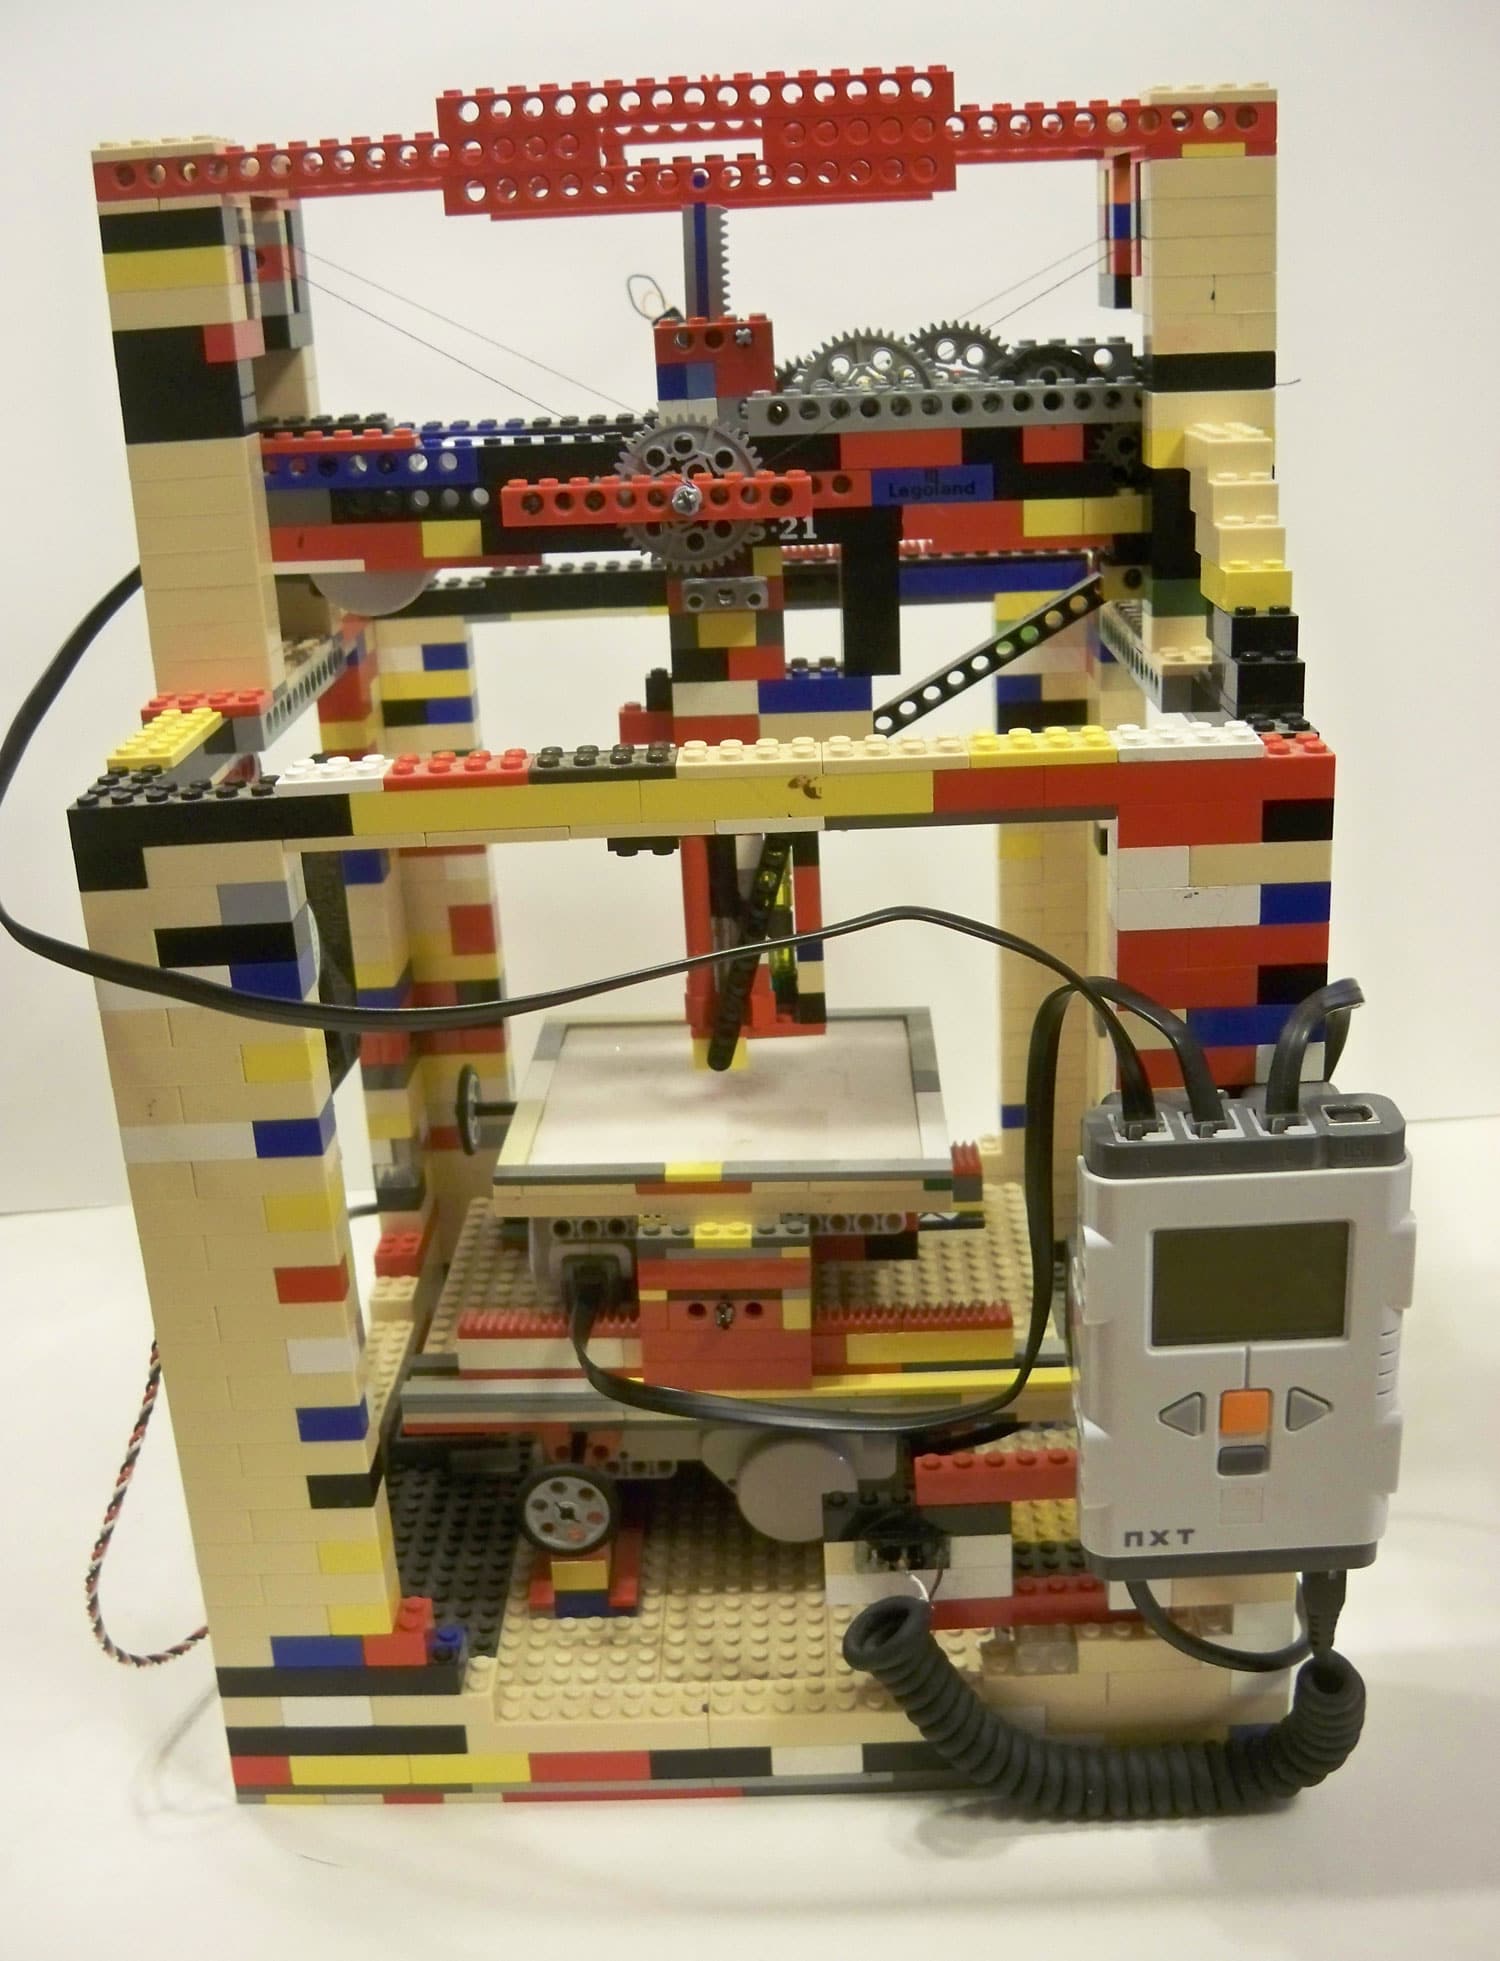 DIY Functional LEGO 3D Printer Build Which Is Super Cheap To Make